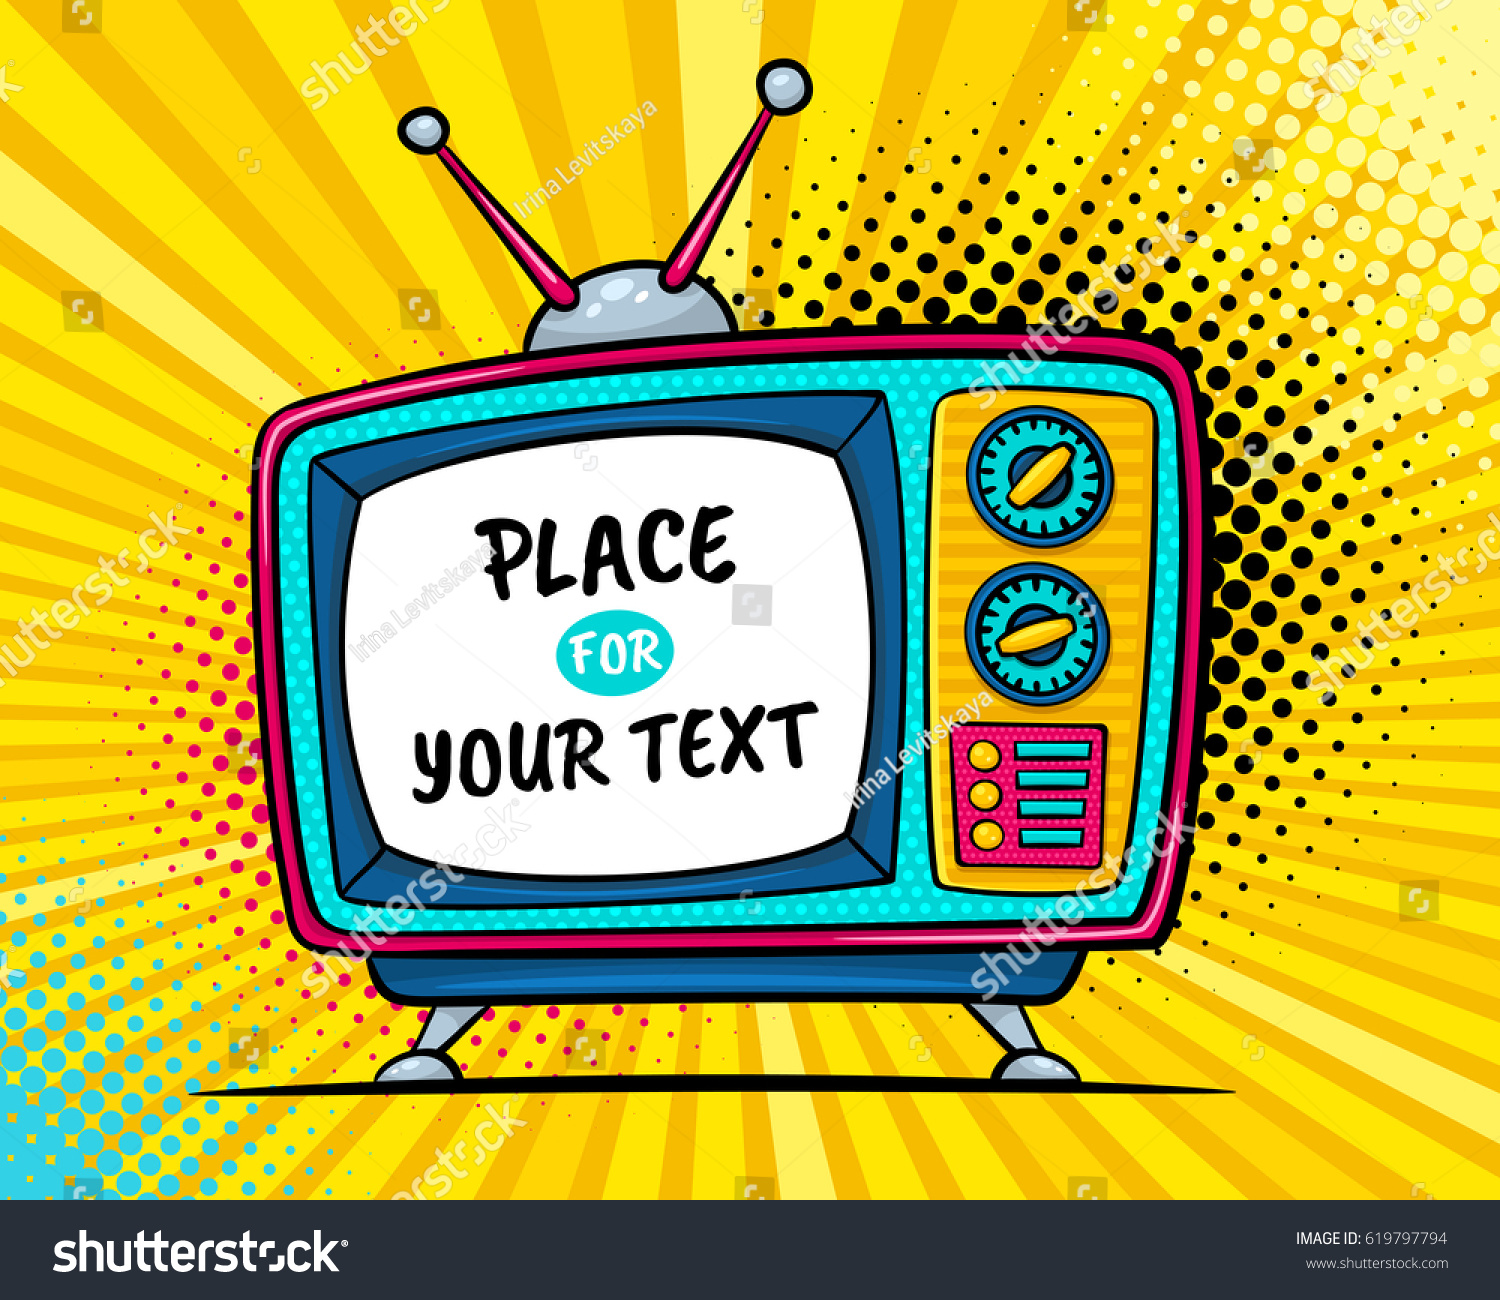 Hand drawn comic retro TV set with place for your text on screen on halftone and dots. Vector colorful background in pop art retro comic style.  #619797794